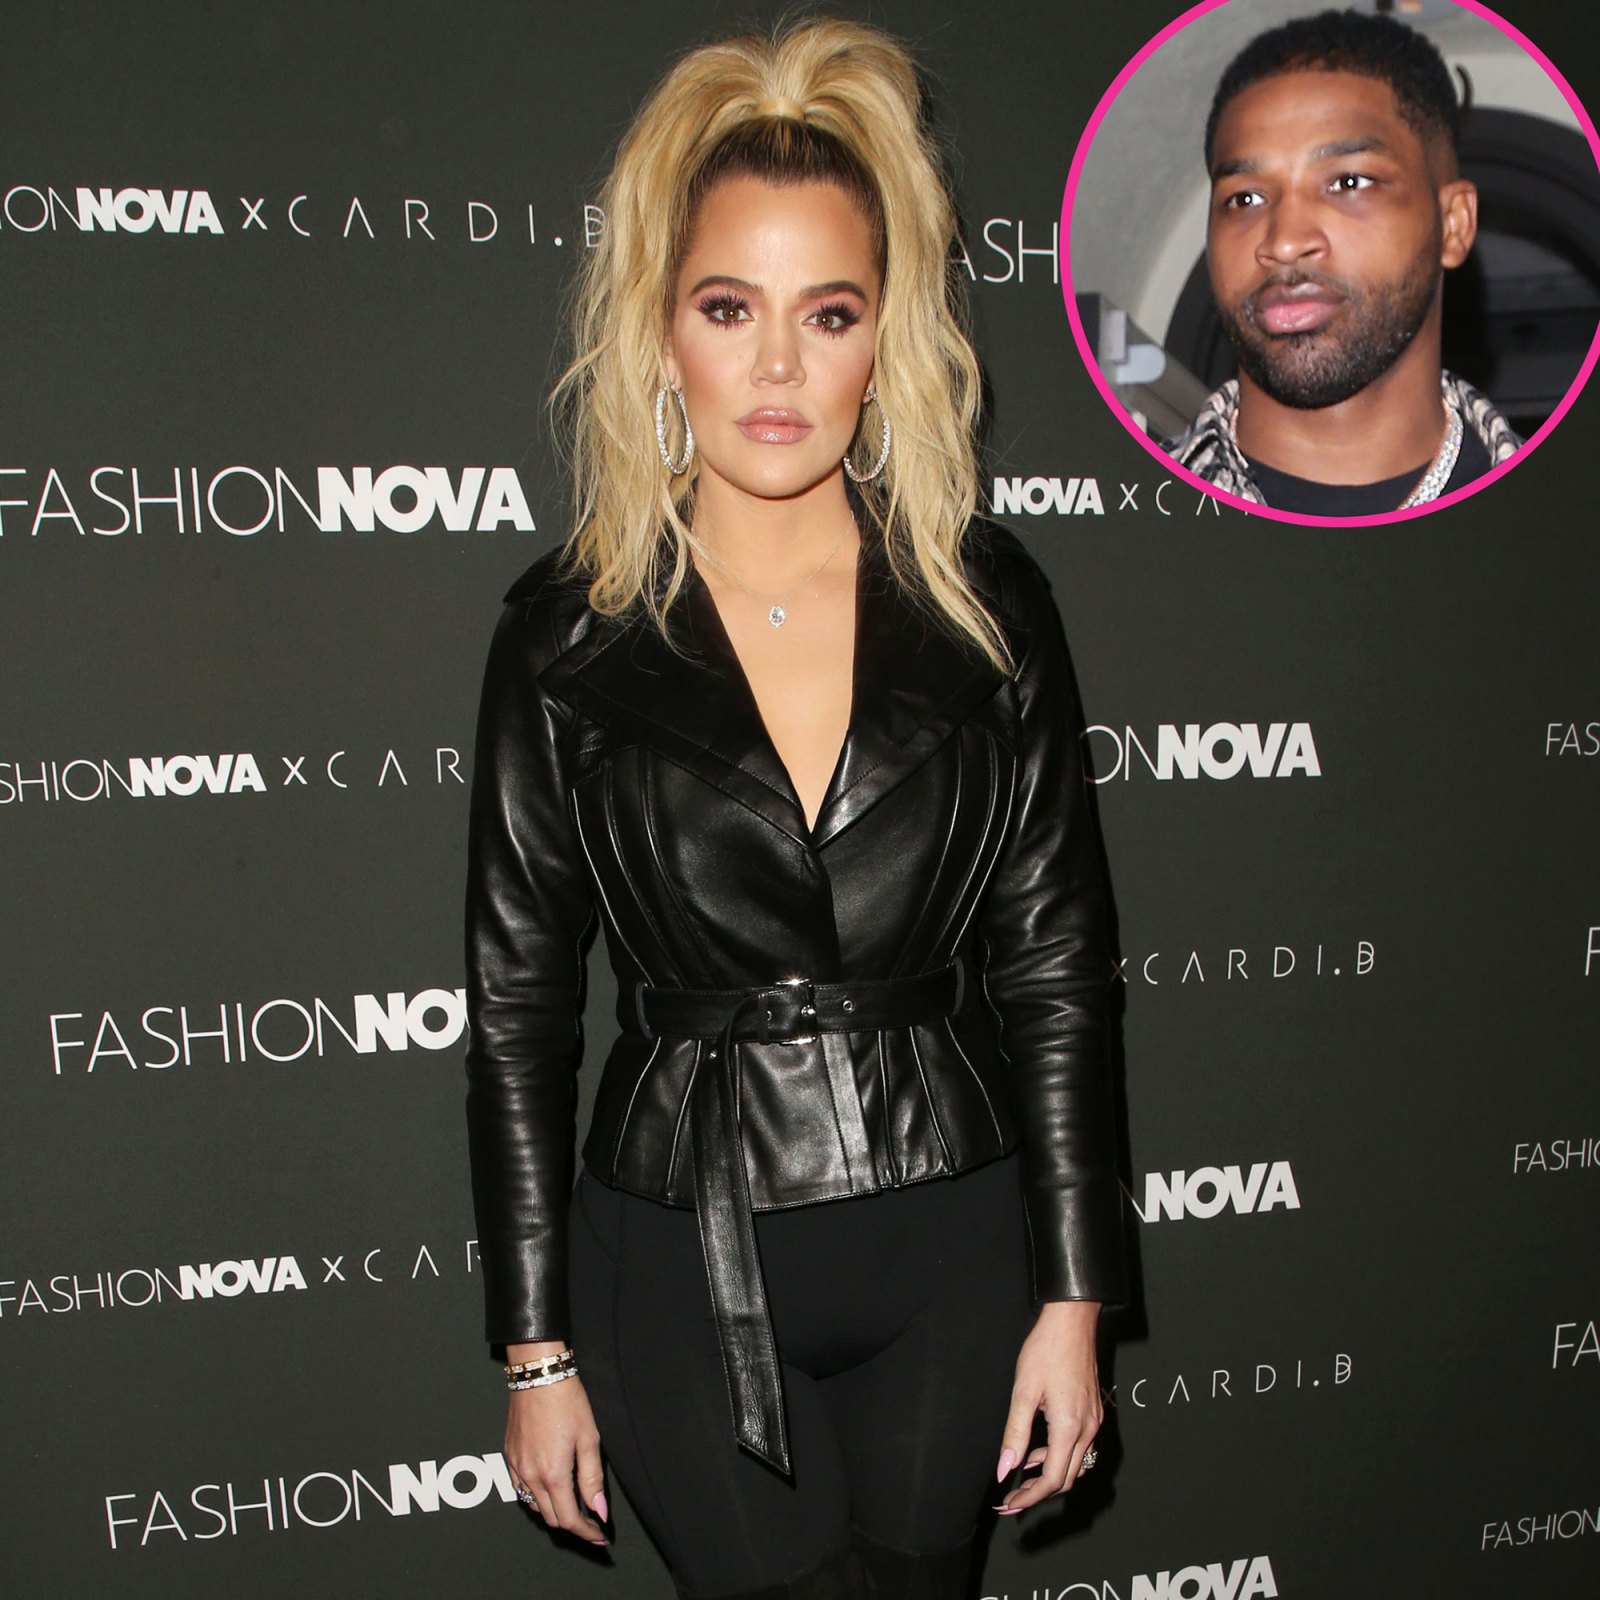 Khloe Considers Getting Back Together With Tristan During The Kardashians